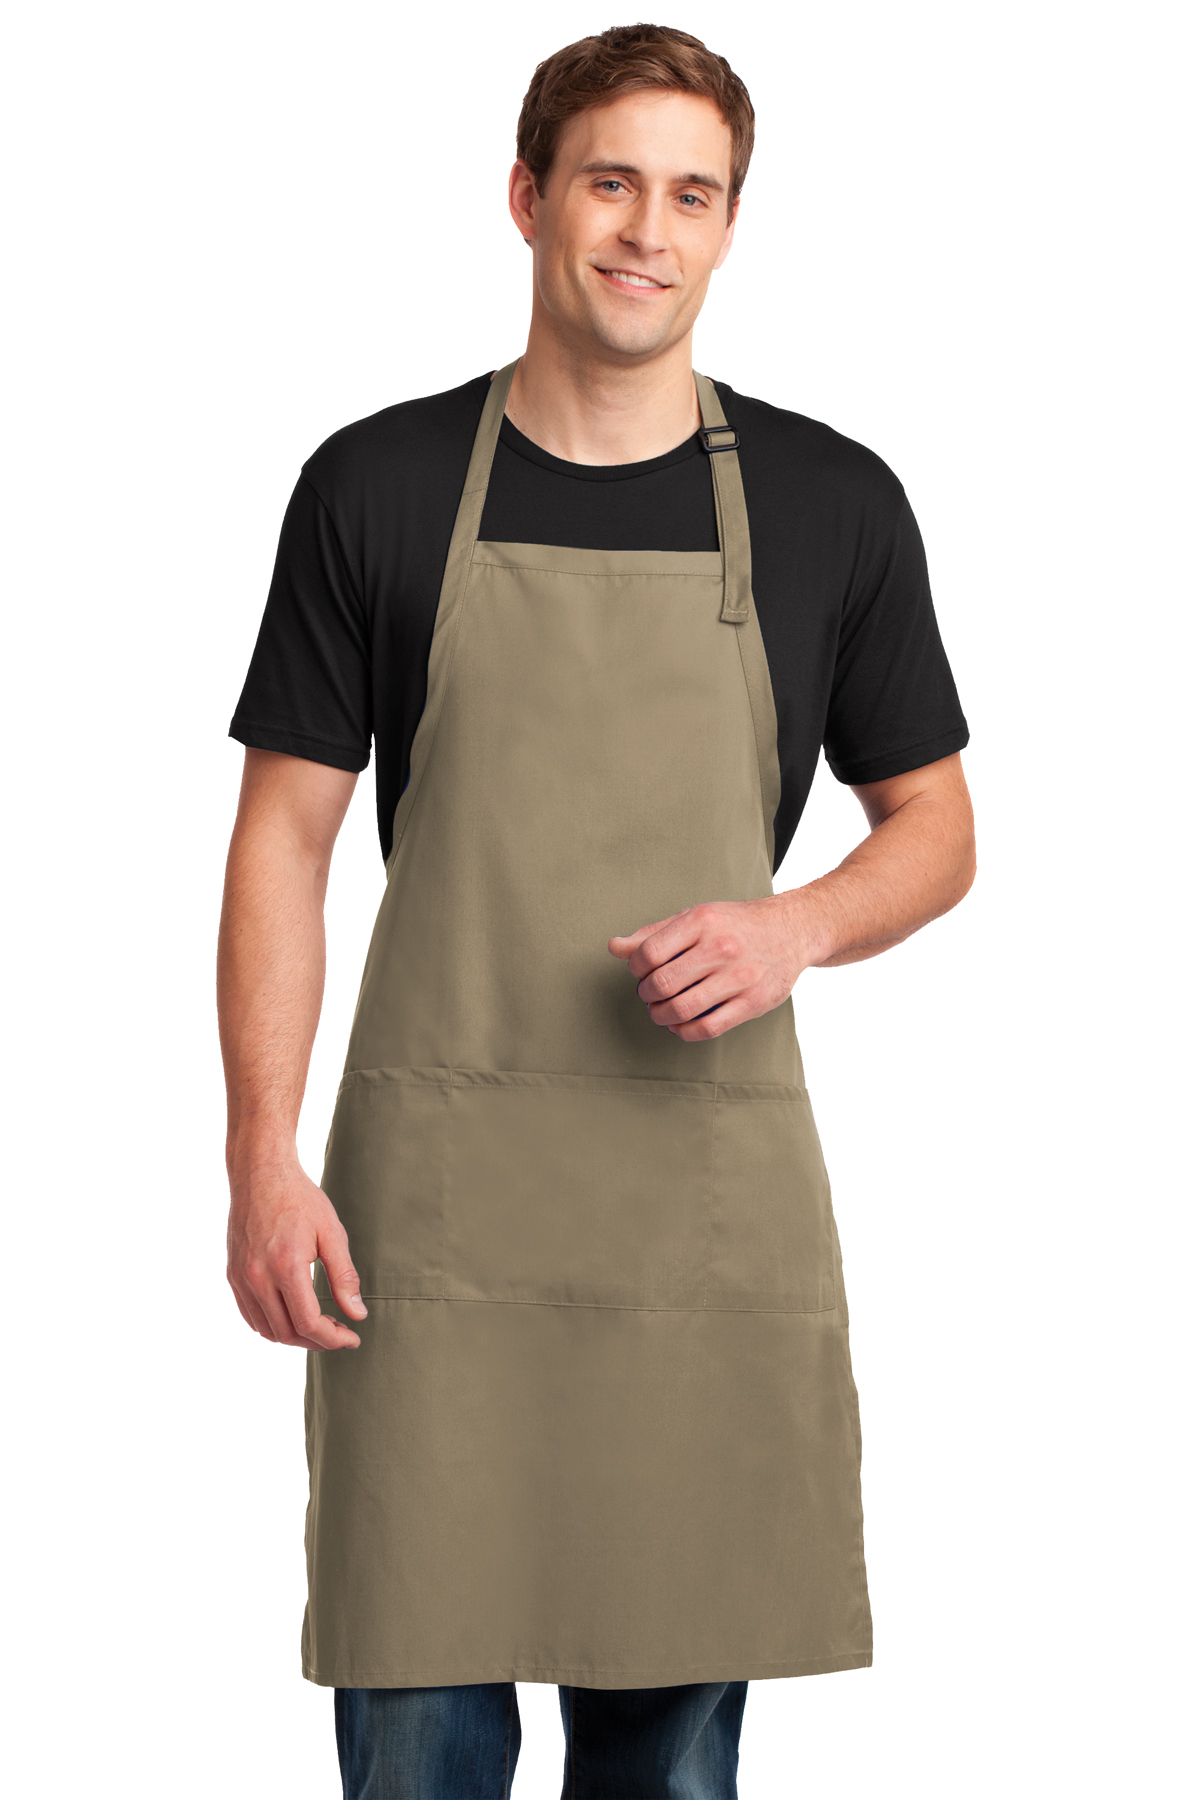 Measuring 48 X 25 With Front Pockets Extra Long Bib Style Denim Apron.